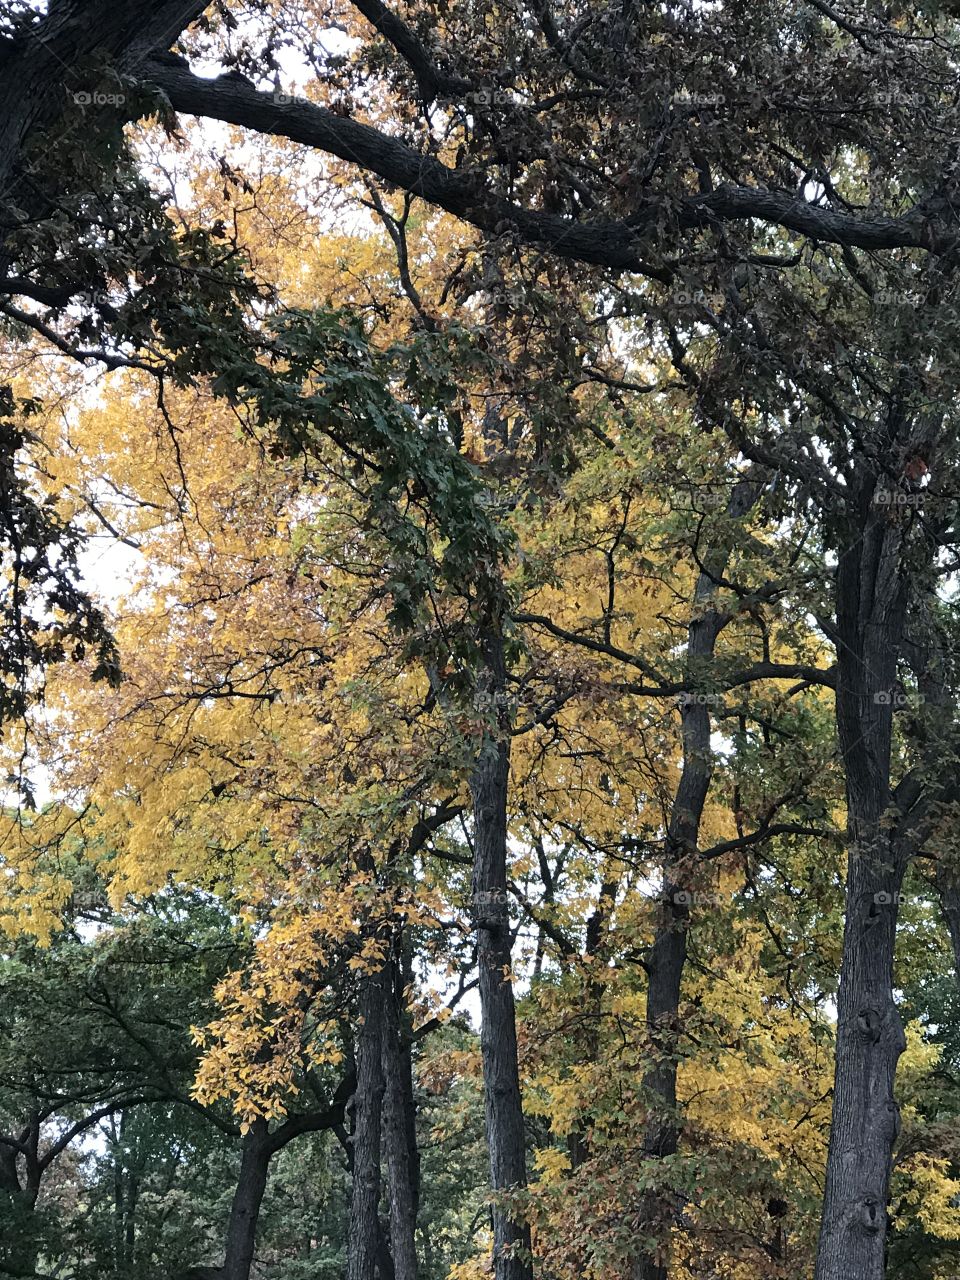 Rainy days and fall color